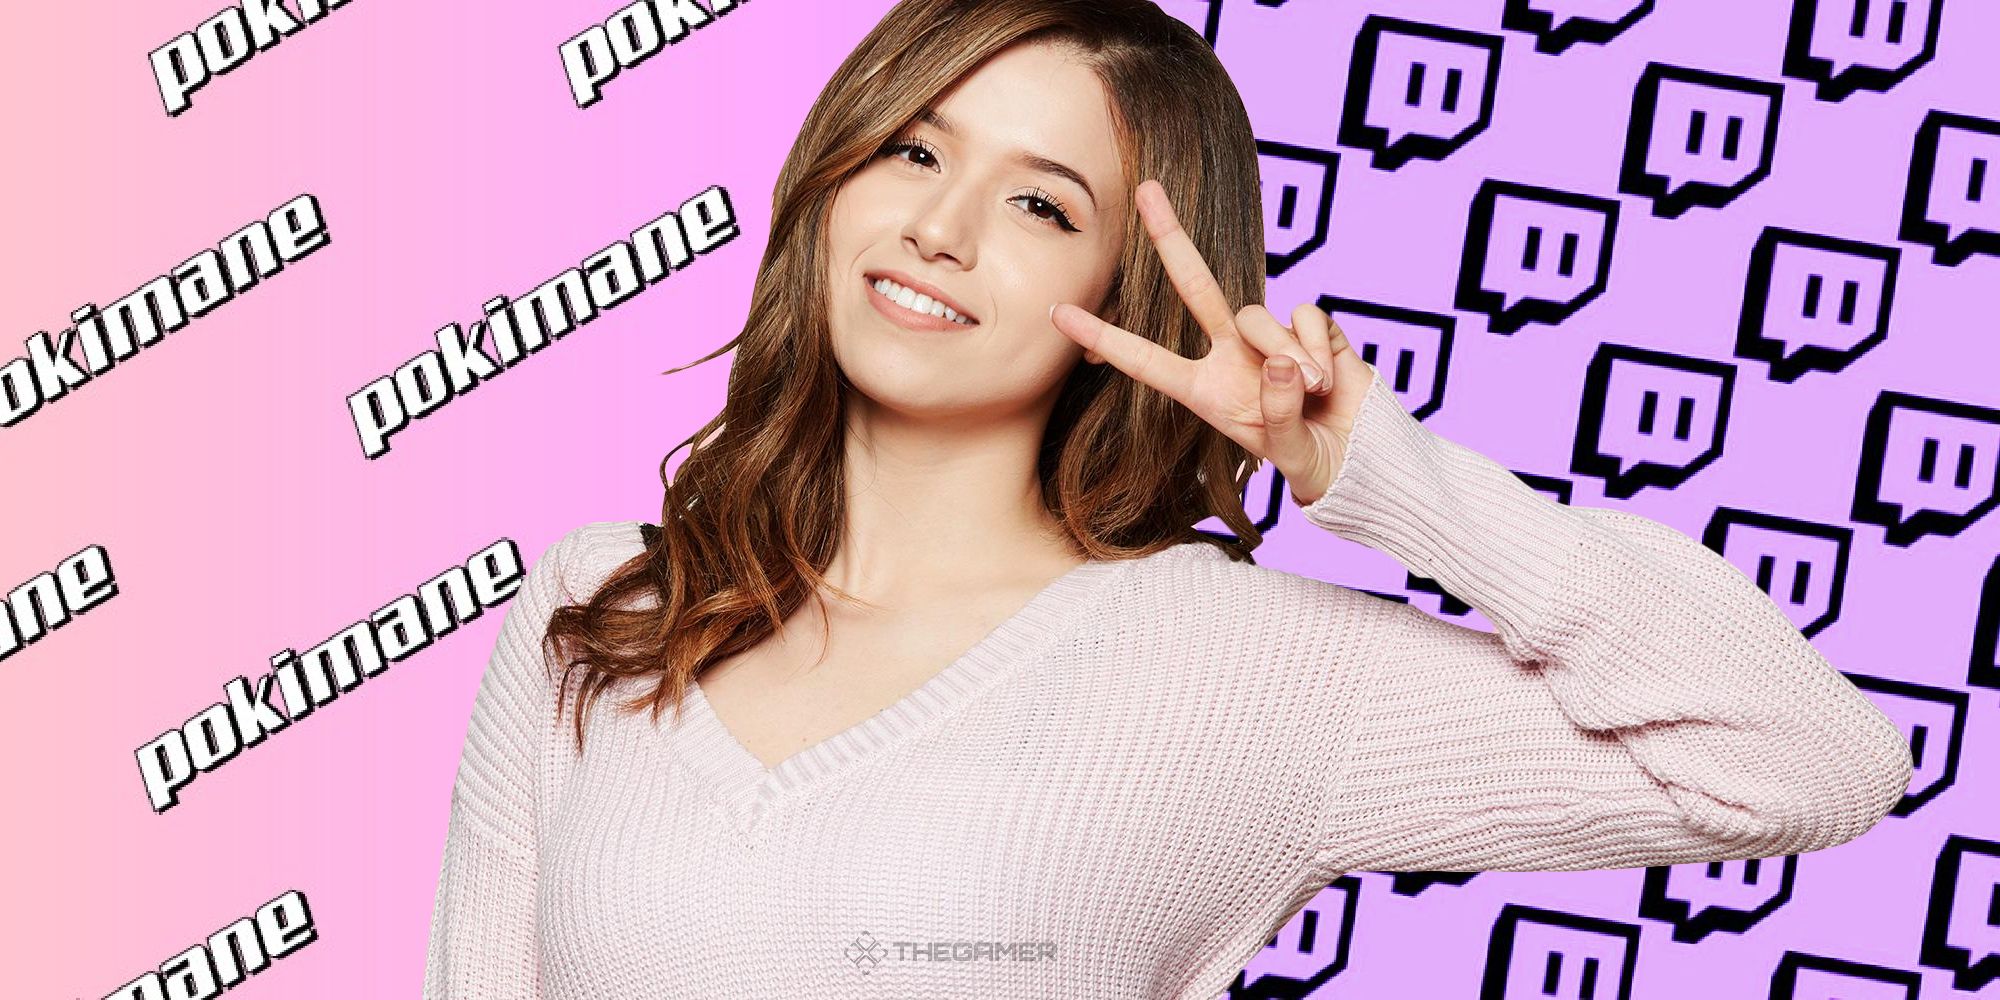 Pokimane Is The First Woman Twitch Streamer To Hit 9 Million Followers 